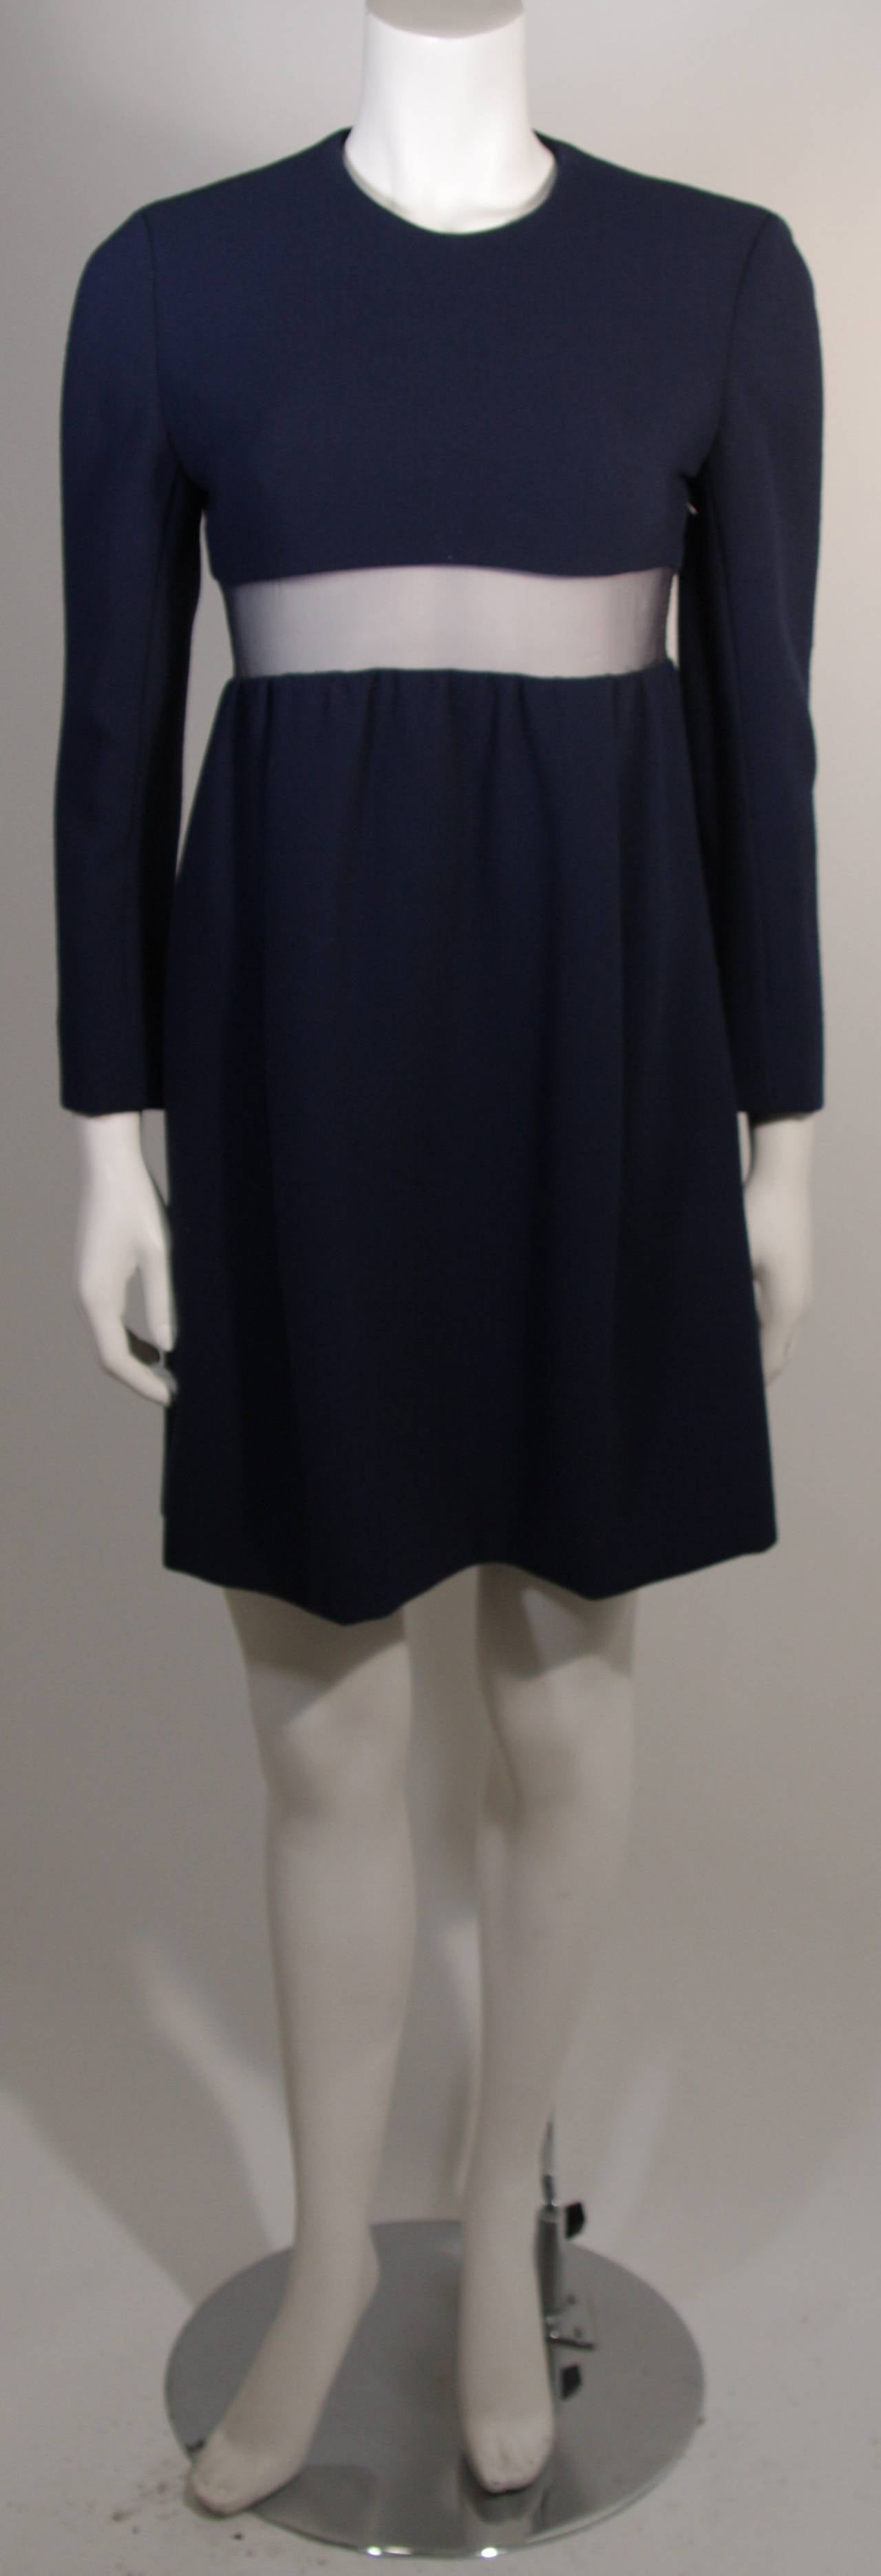 Galanos Navy Wool Mini Dress with Peek-a-boo Mesh Panel size 4 For Sale ...